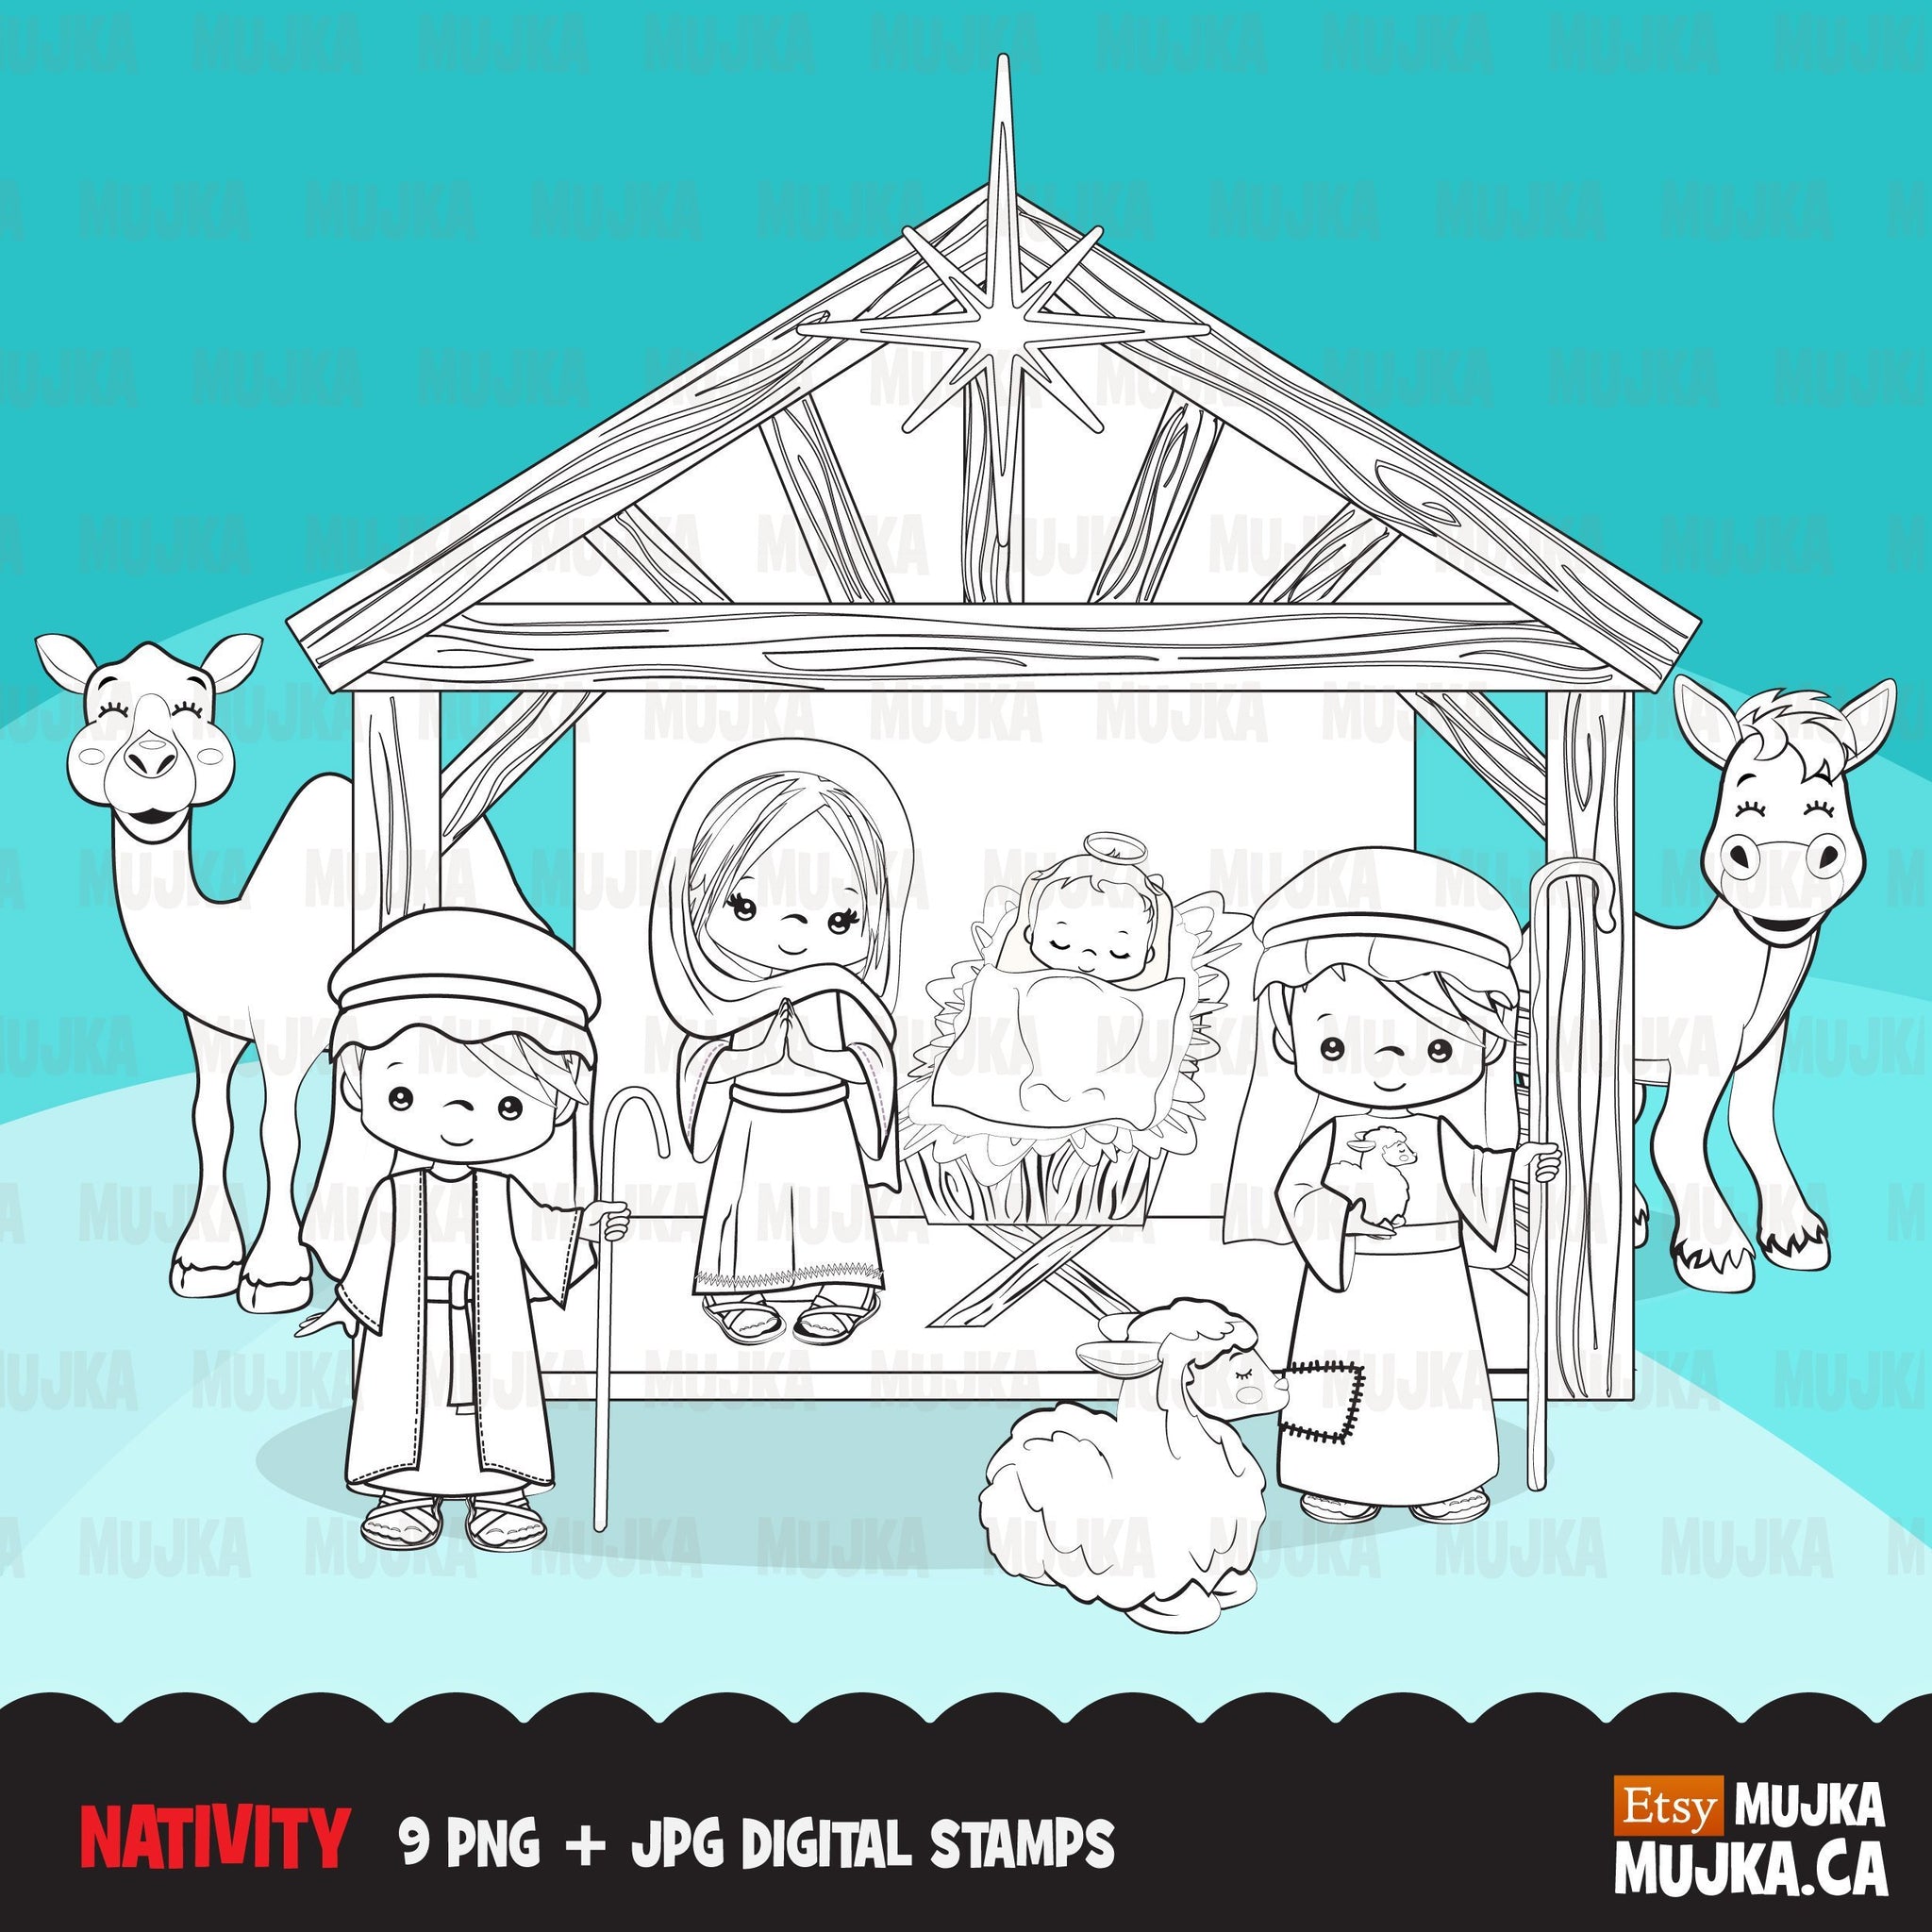 Nativity Digital Stamps, boy and girl religious